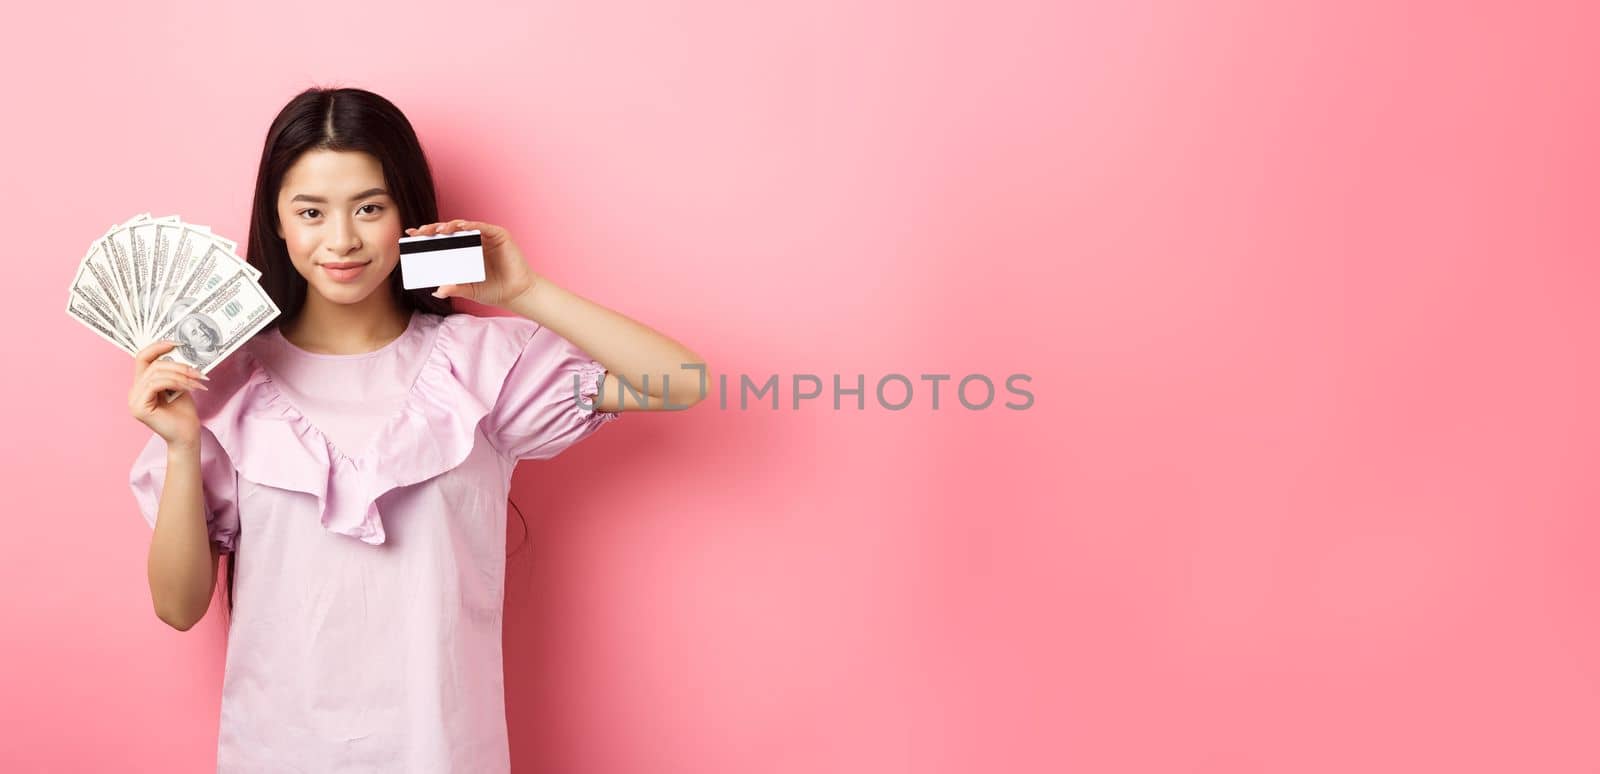 Smiling beautiful asian girl showing money and plastic credit card, giving choice, standing against pink background.